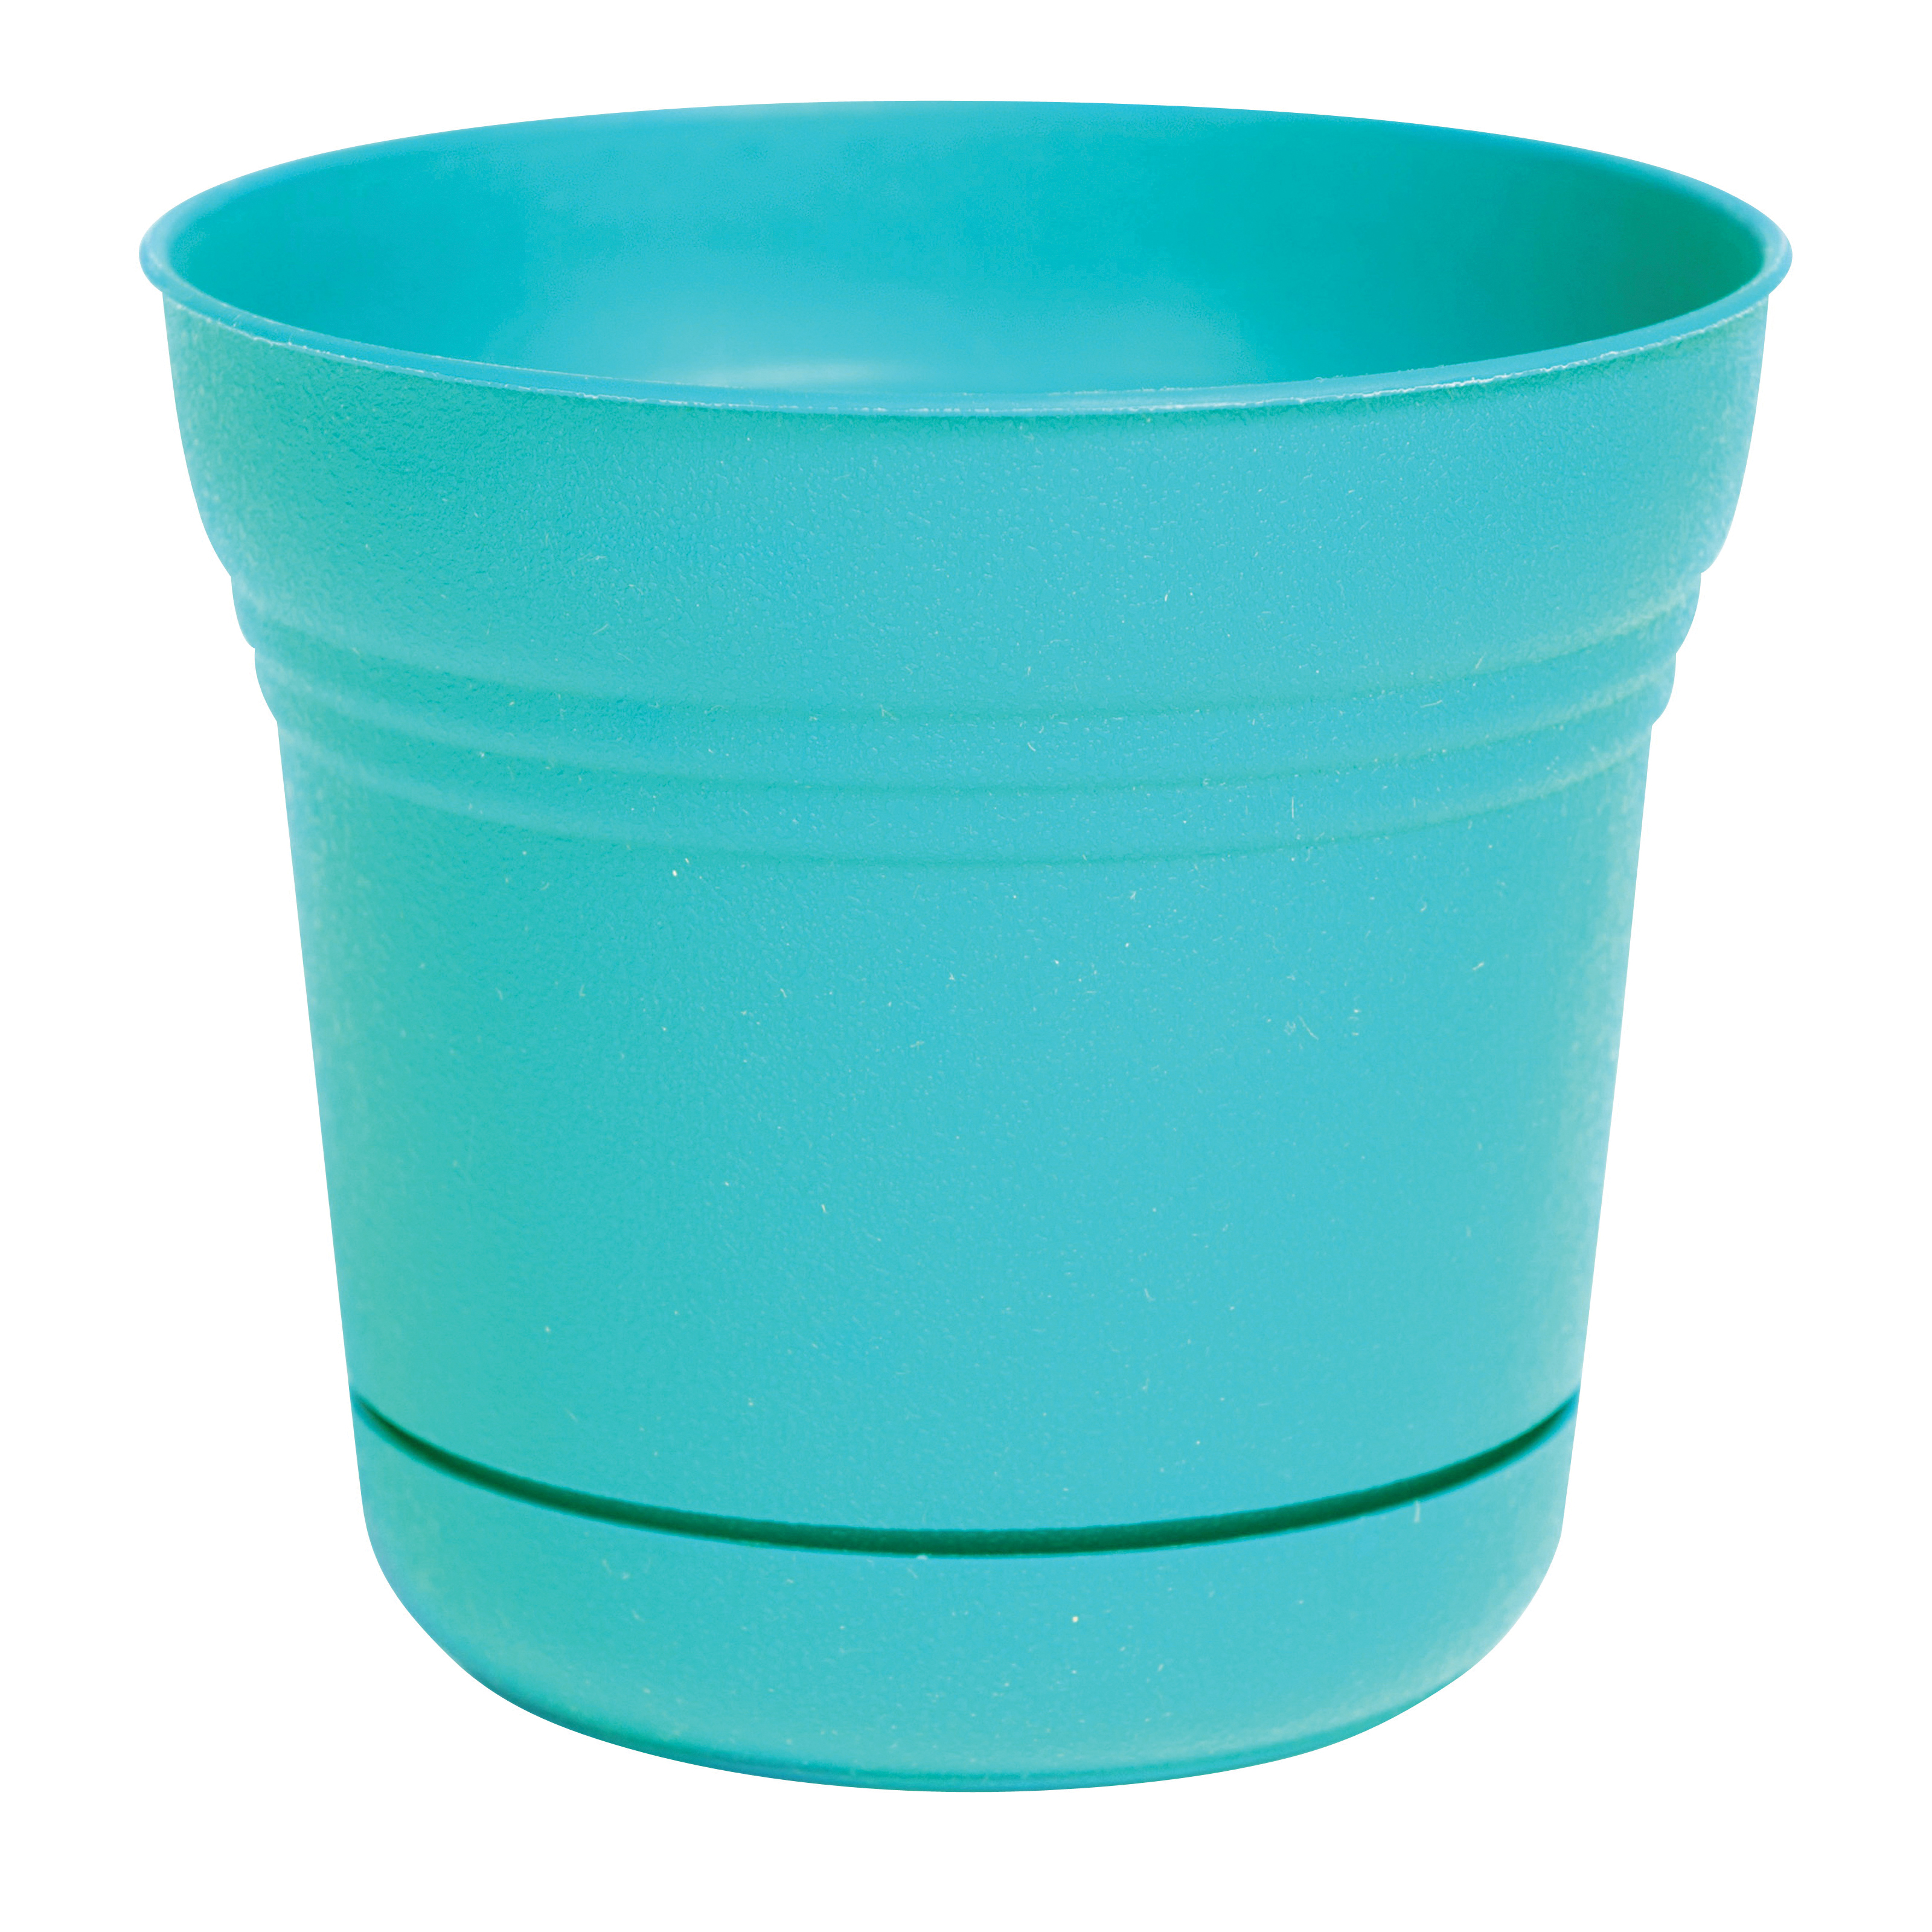 SP1027 Planter, 8-1/2 in H, 10 in W, Bell, Plastic, Teal, Matte